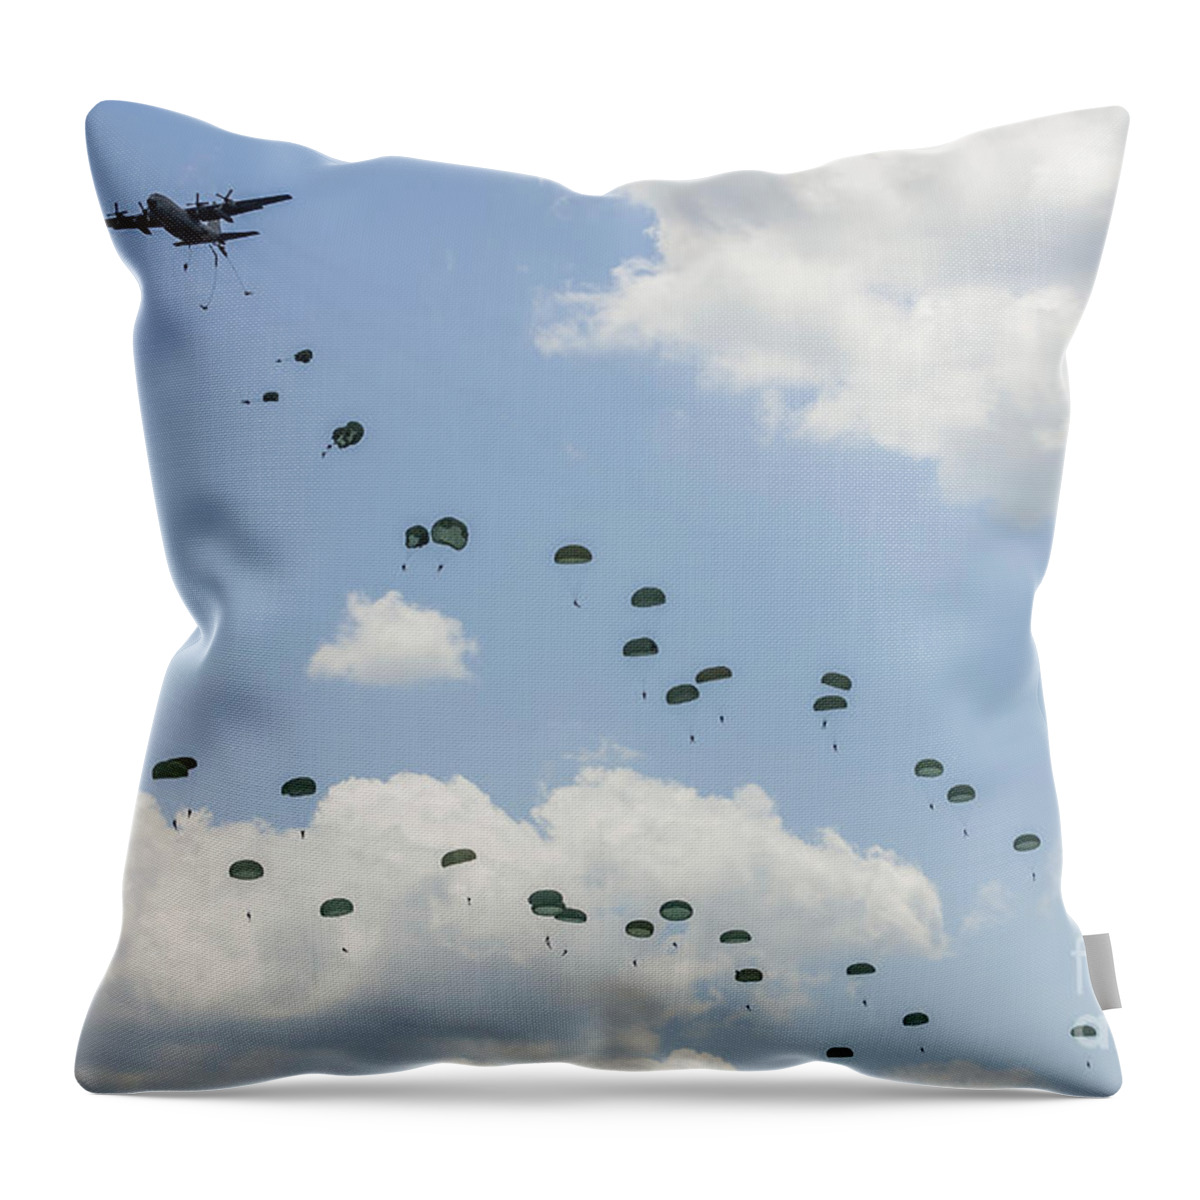 C-130 Throw Pillow featuring the photograph A C-130 Hercules Drop U.s. Army by Rob Edgcumbe